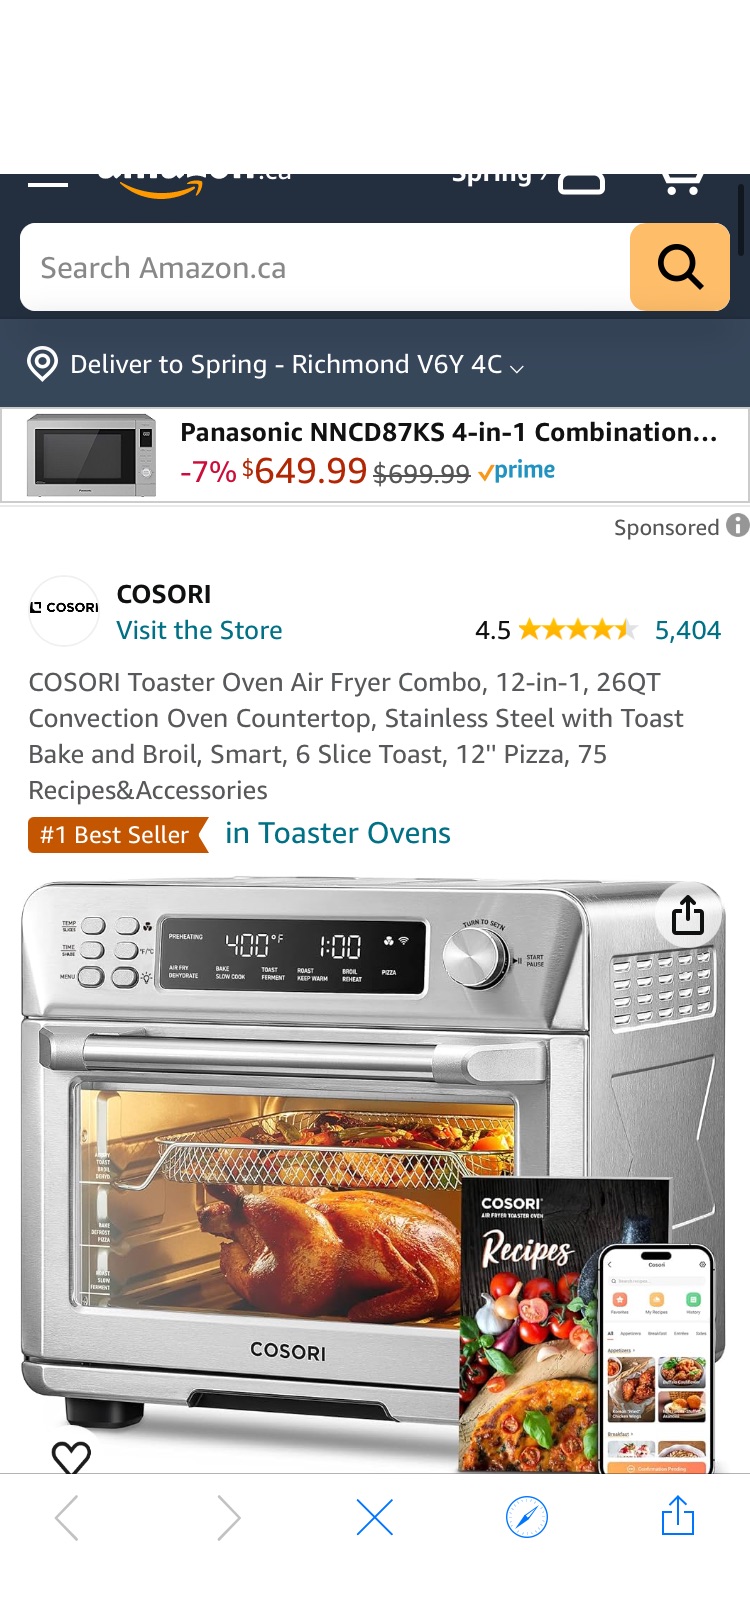 COSORI Toaster Oven Air Fryer Combo, 12-in-1, 26QT Convection Oven Countertop, Stainless Steel with Toast Bake and Broil, Smart, 6 Slice Toast, 12'' Pizza, 75 Recipes&Accessories : Amazon.ca: Home